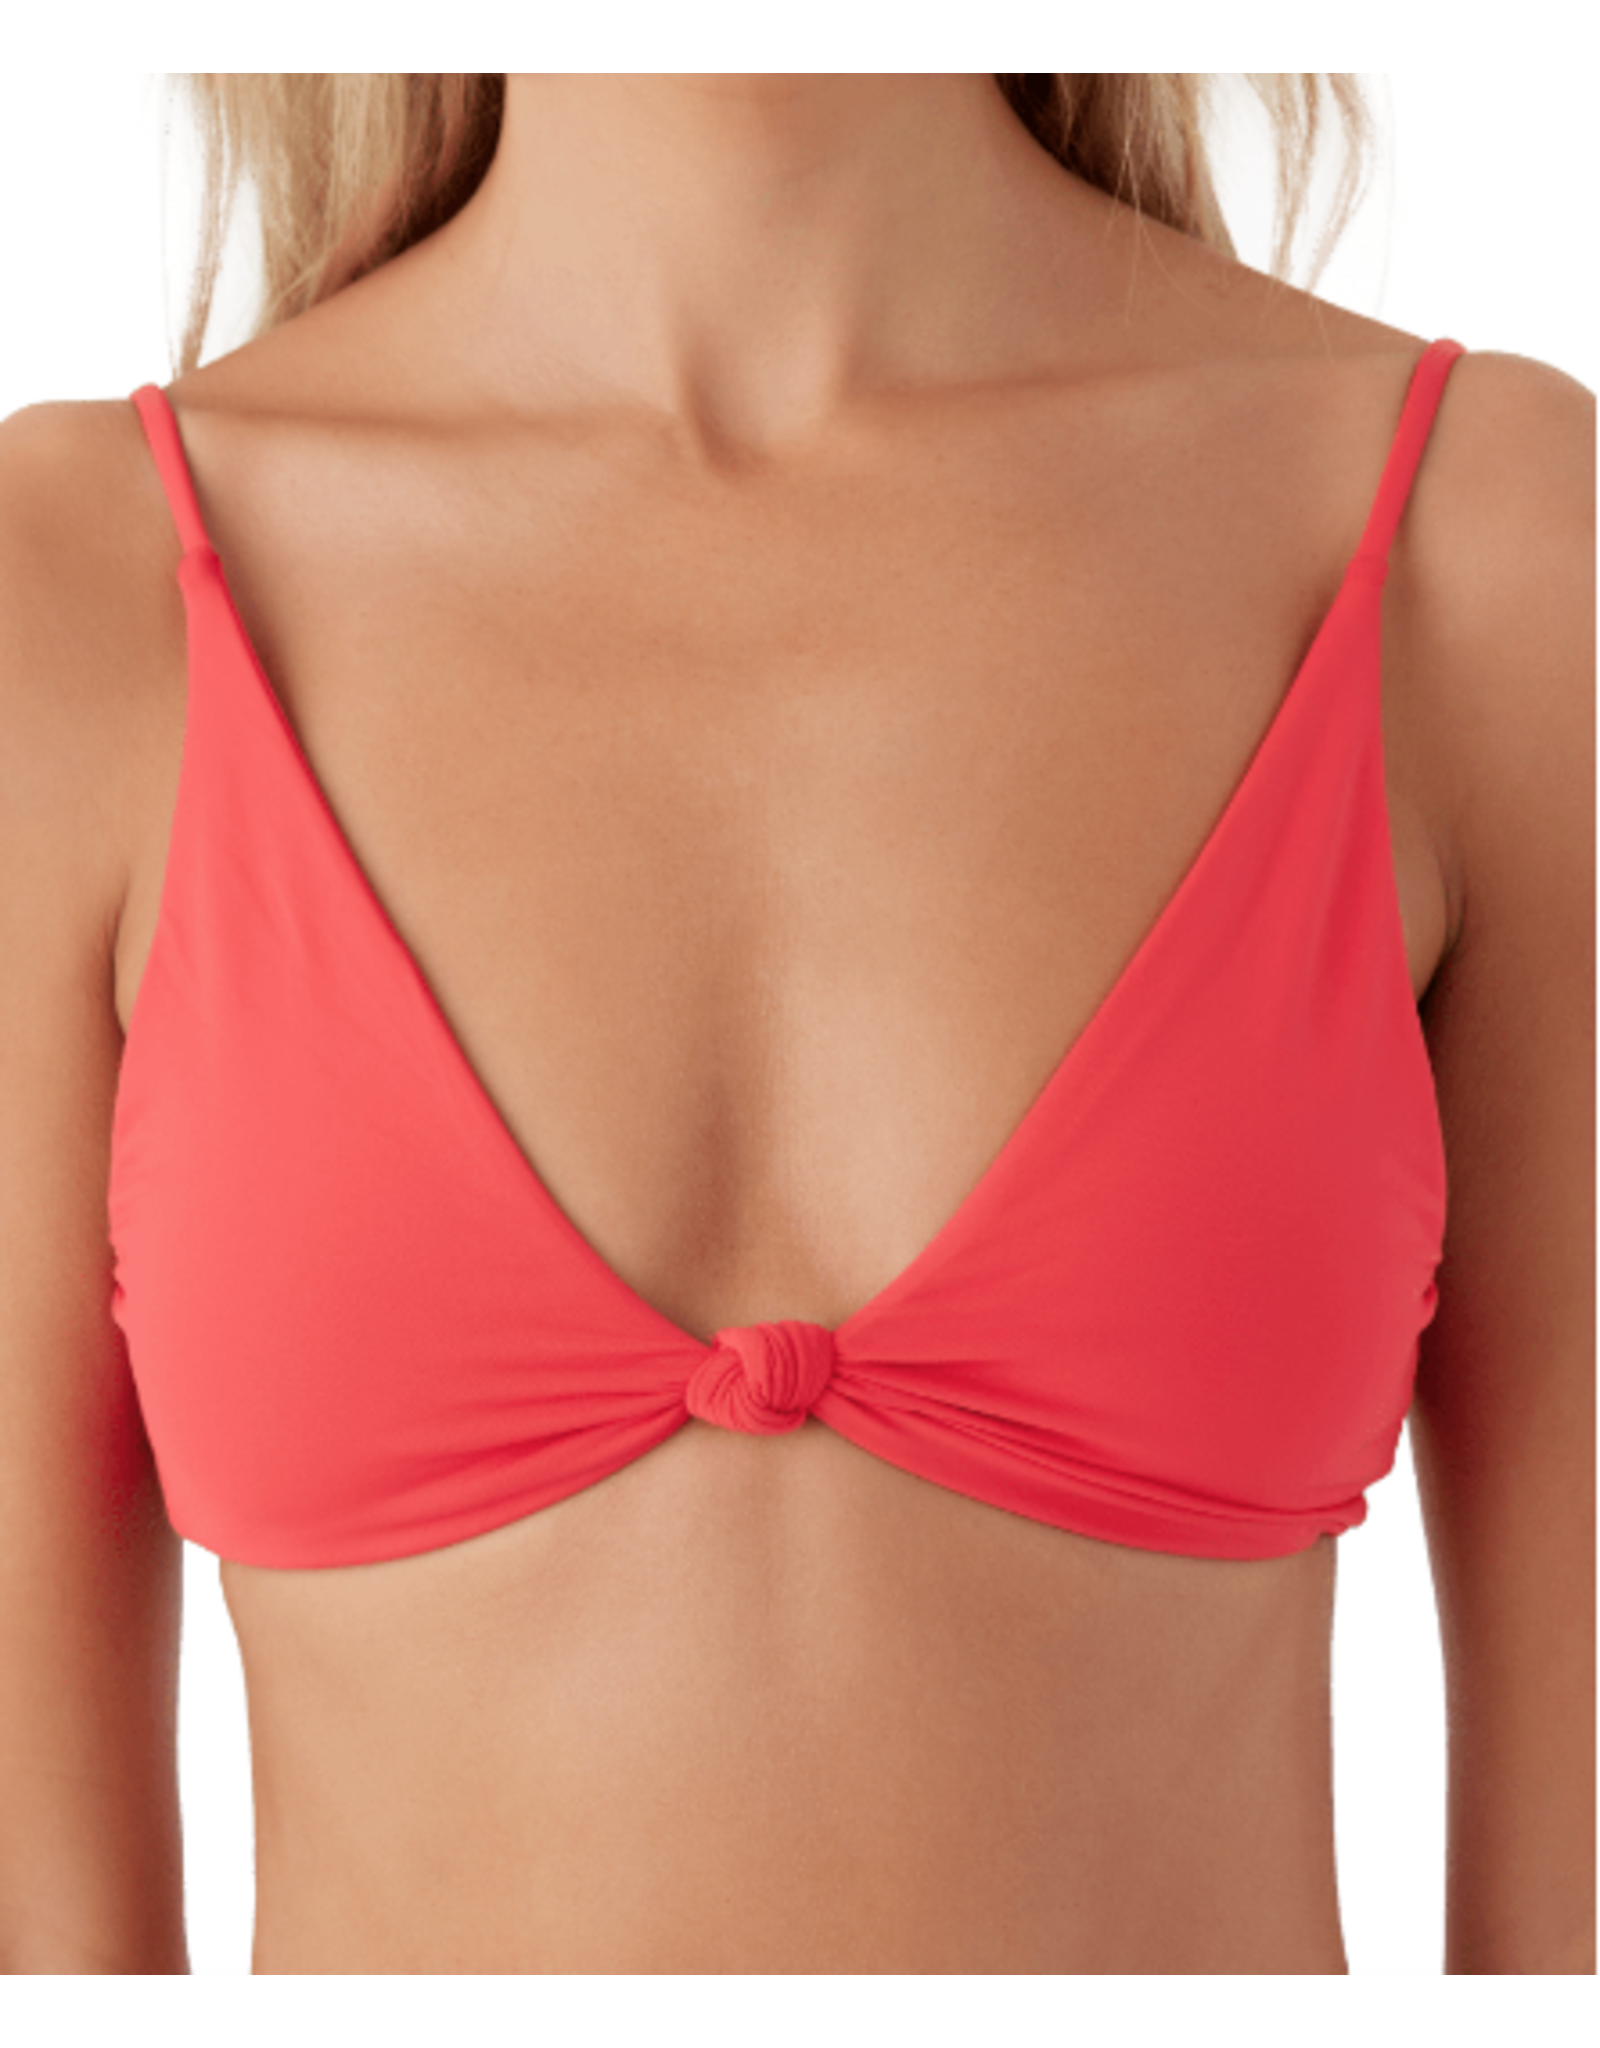 O'NEILL SALTWATER SOLIDS PISMO BRALETTE TOP